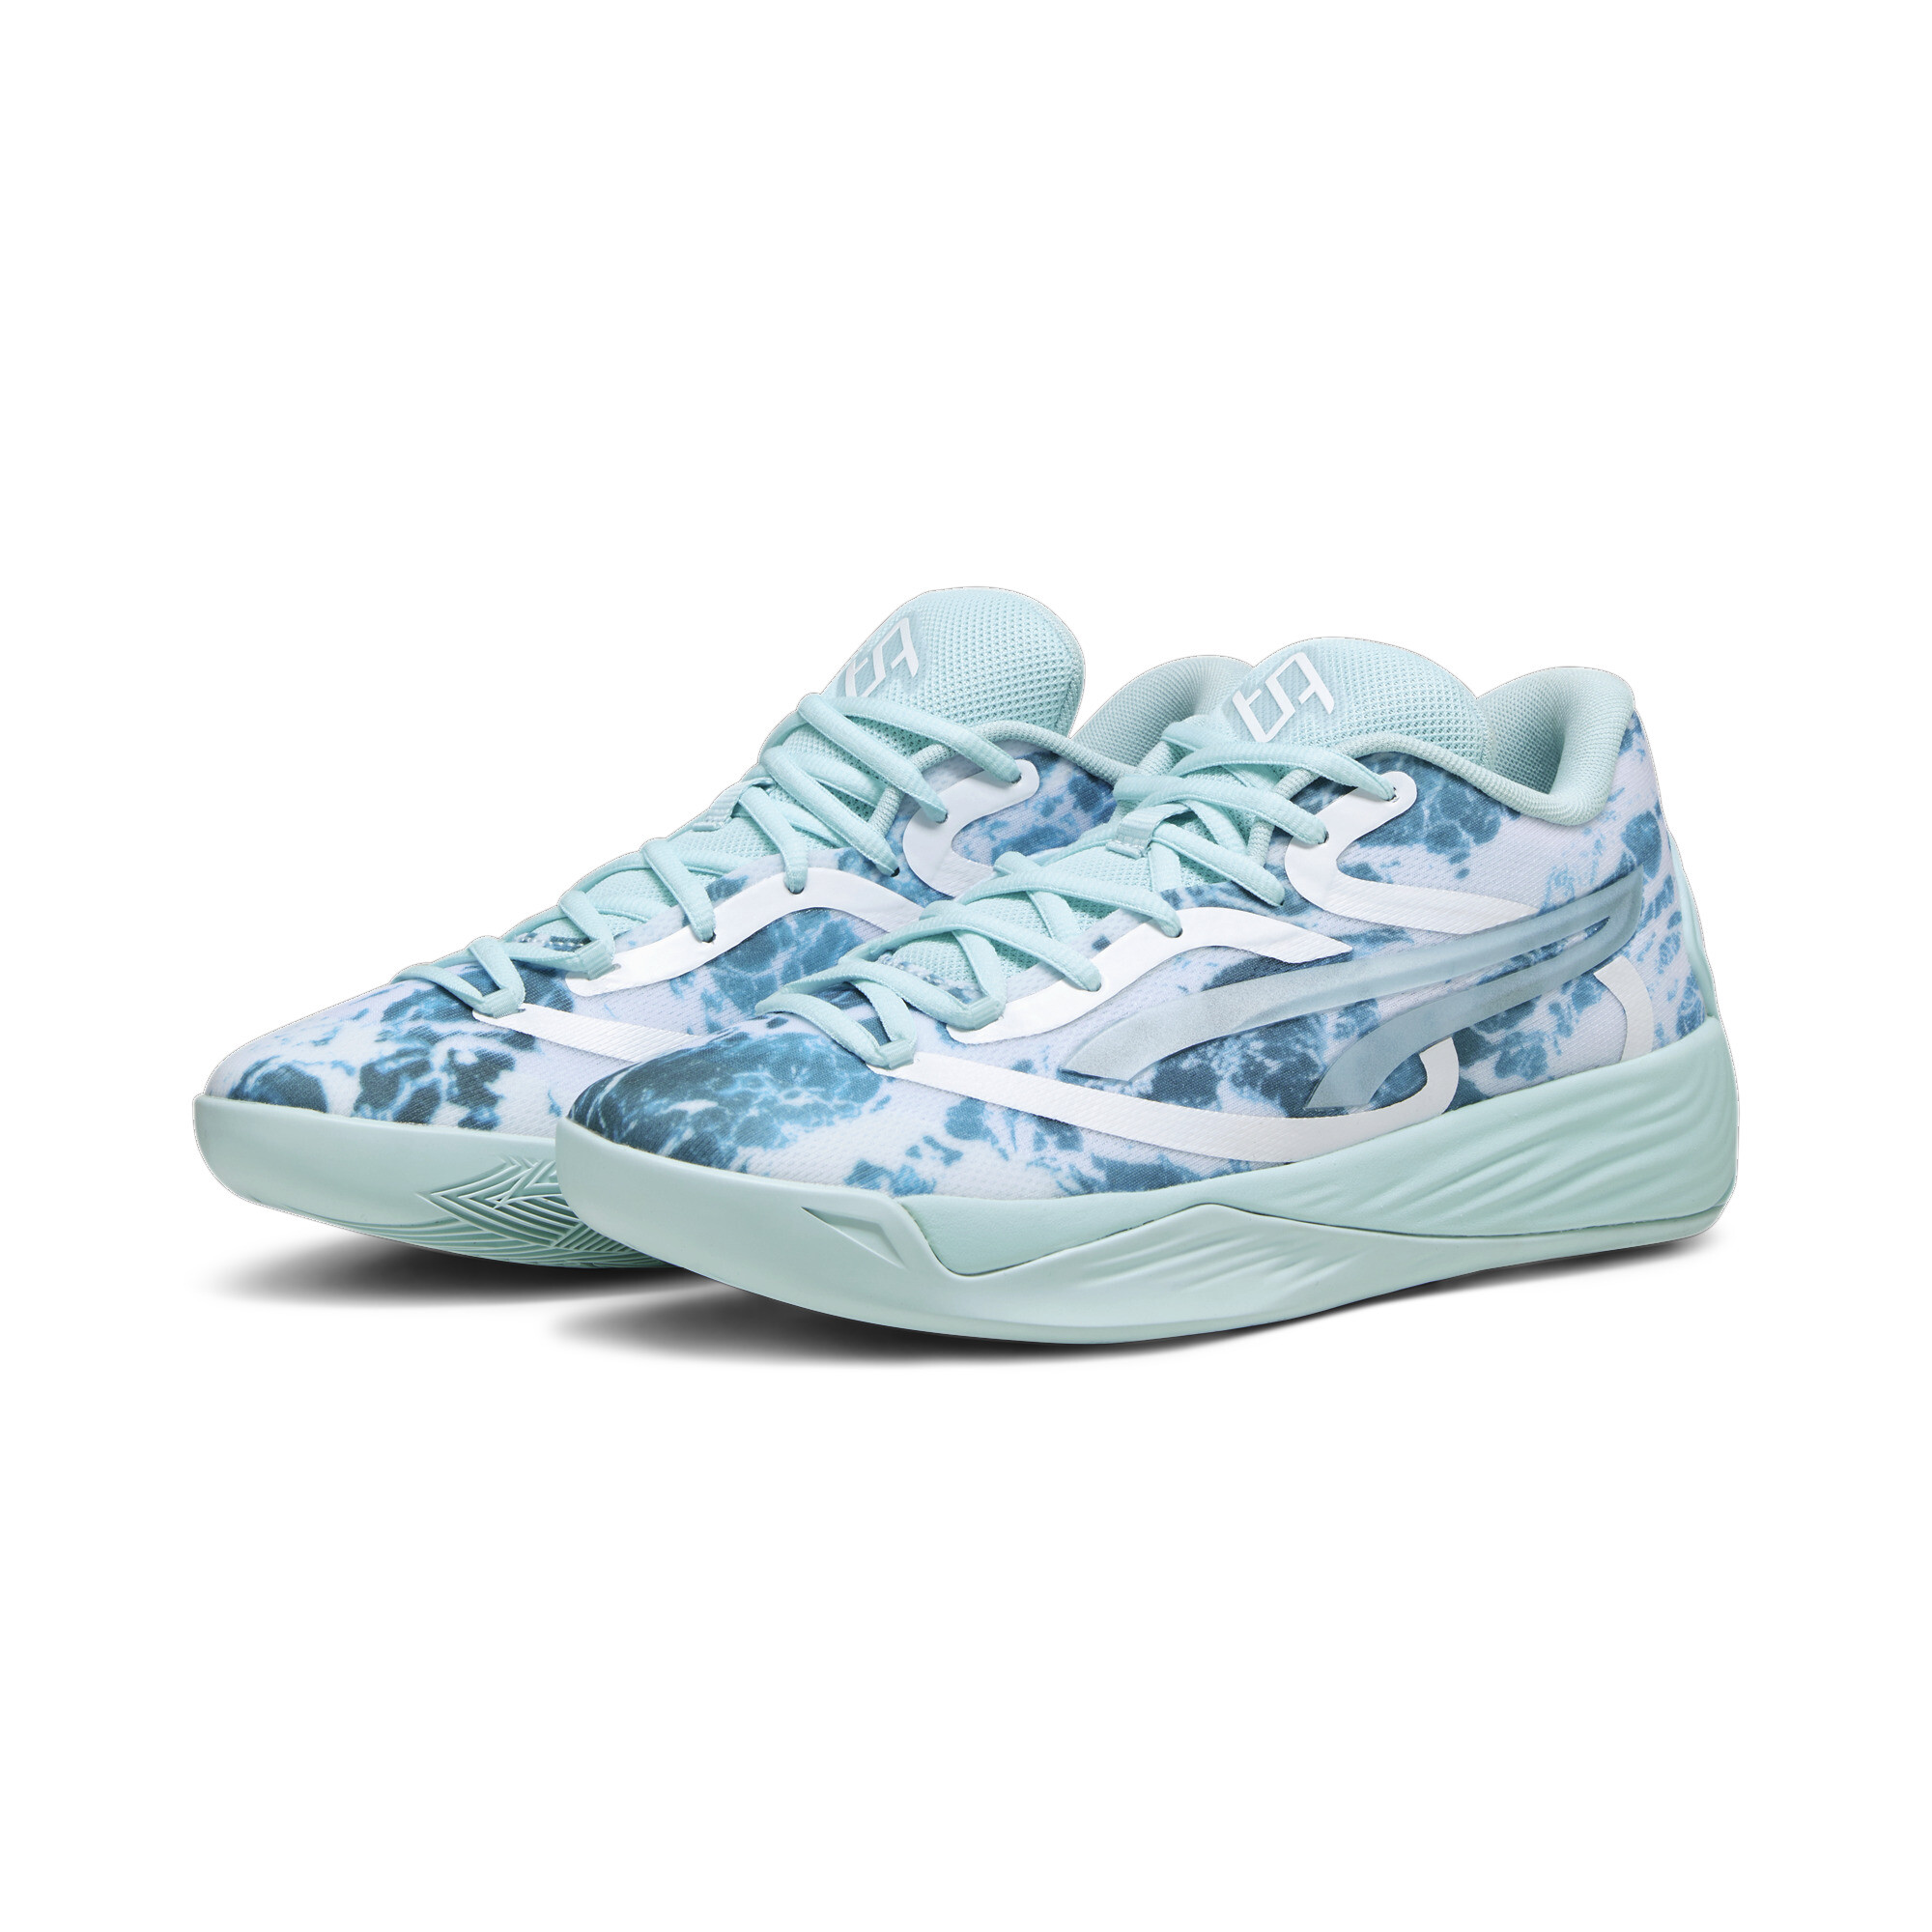 Women's Puma Stewie 2 Water's Basketball Shoes, Blue, Size 42.5, Shoes